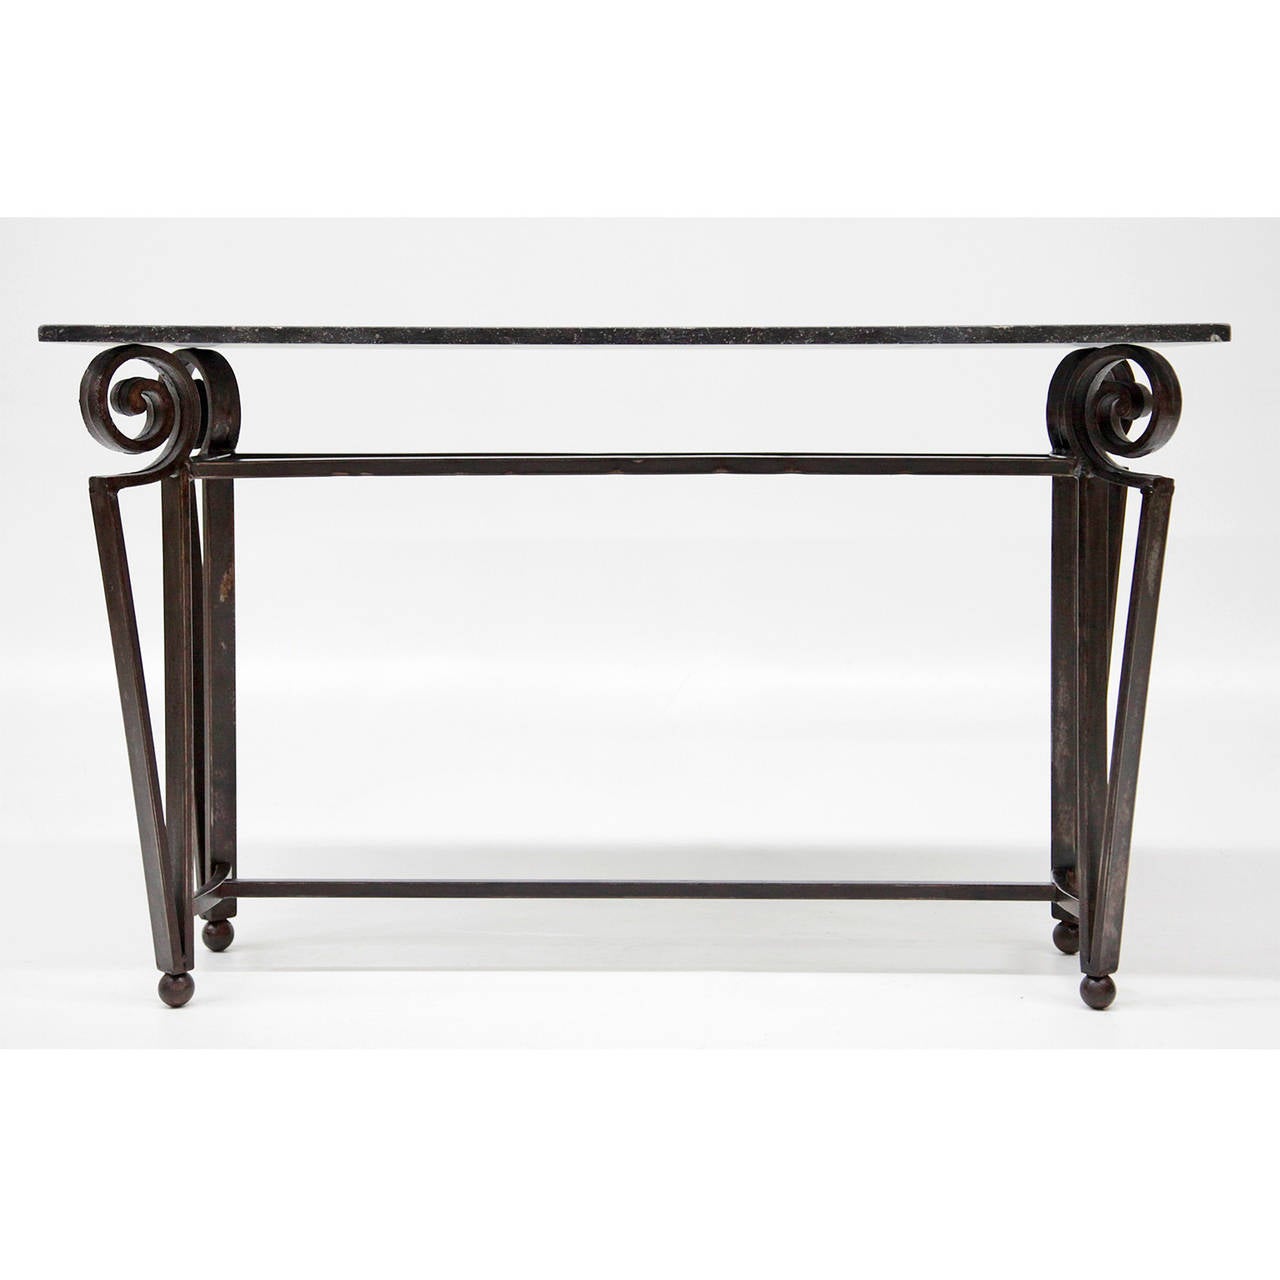 Beautiful french Console Table with black marble top